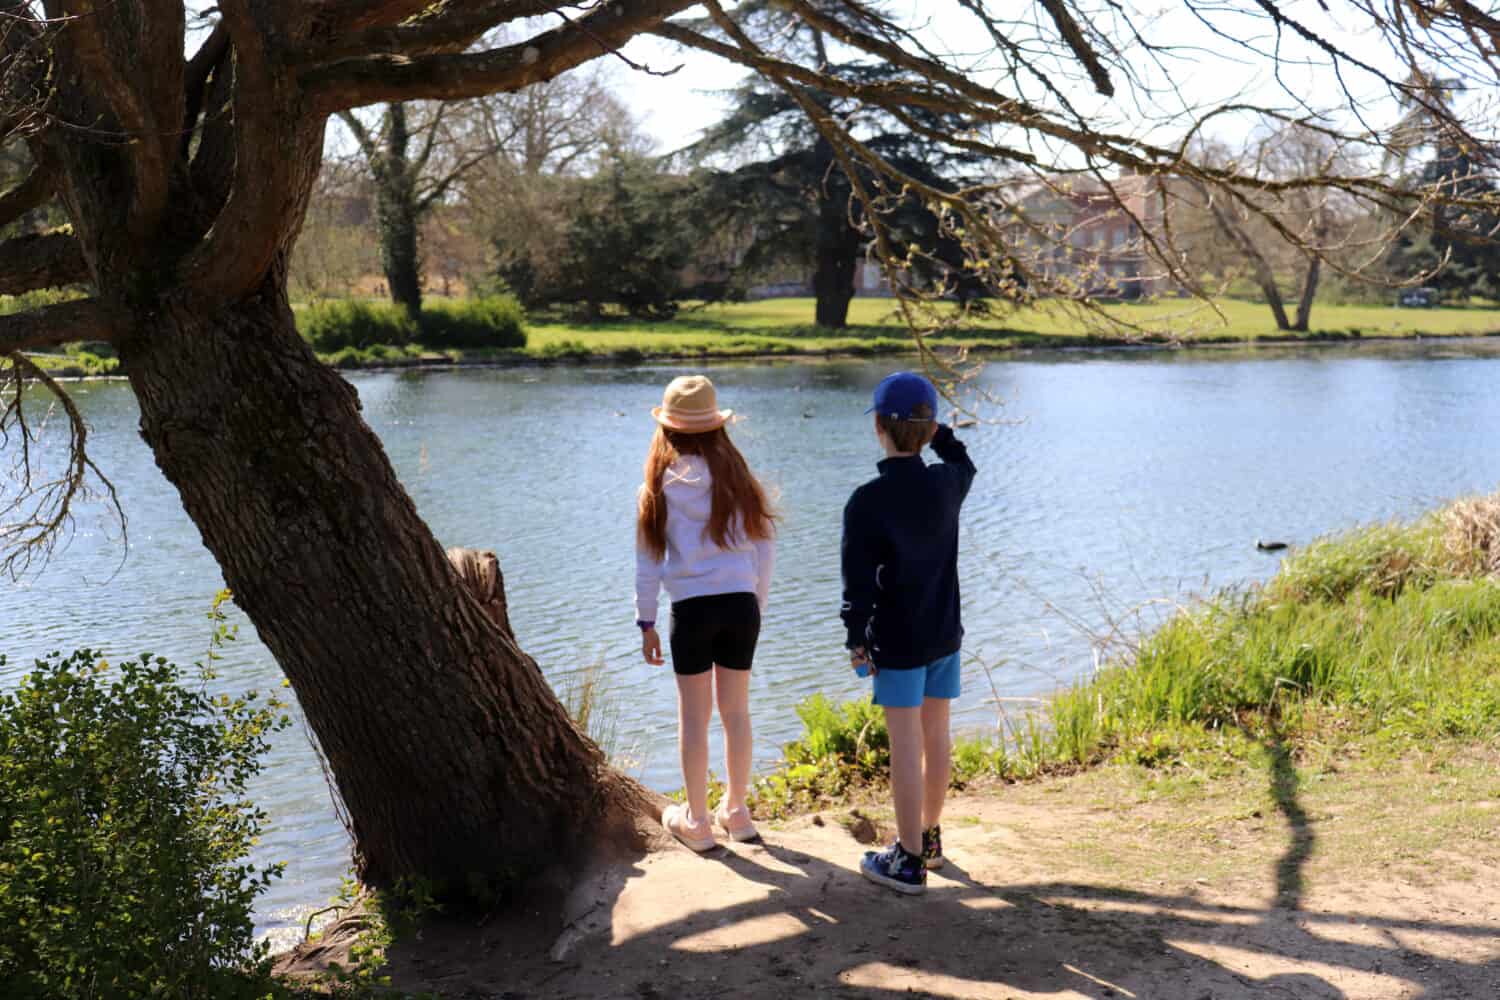 A Covid Safe Visit to The Vyne {National Trust}